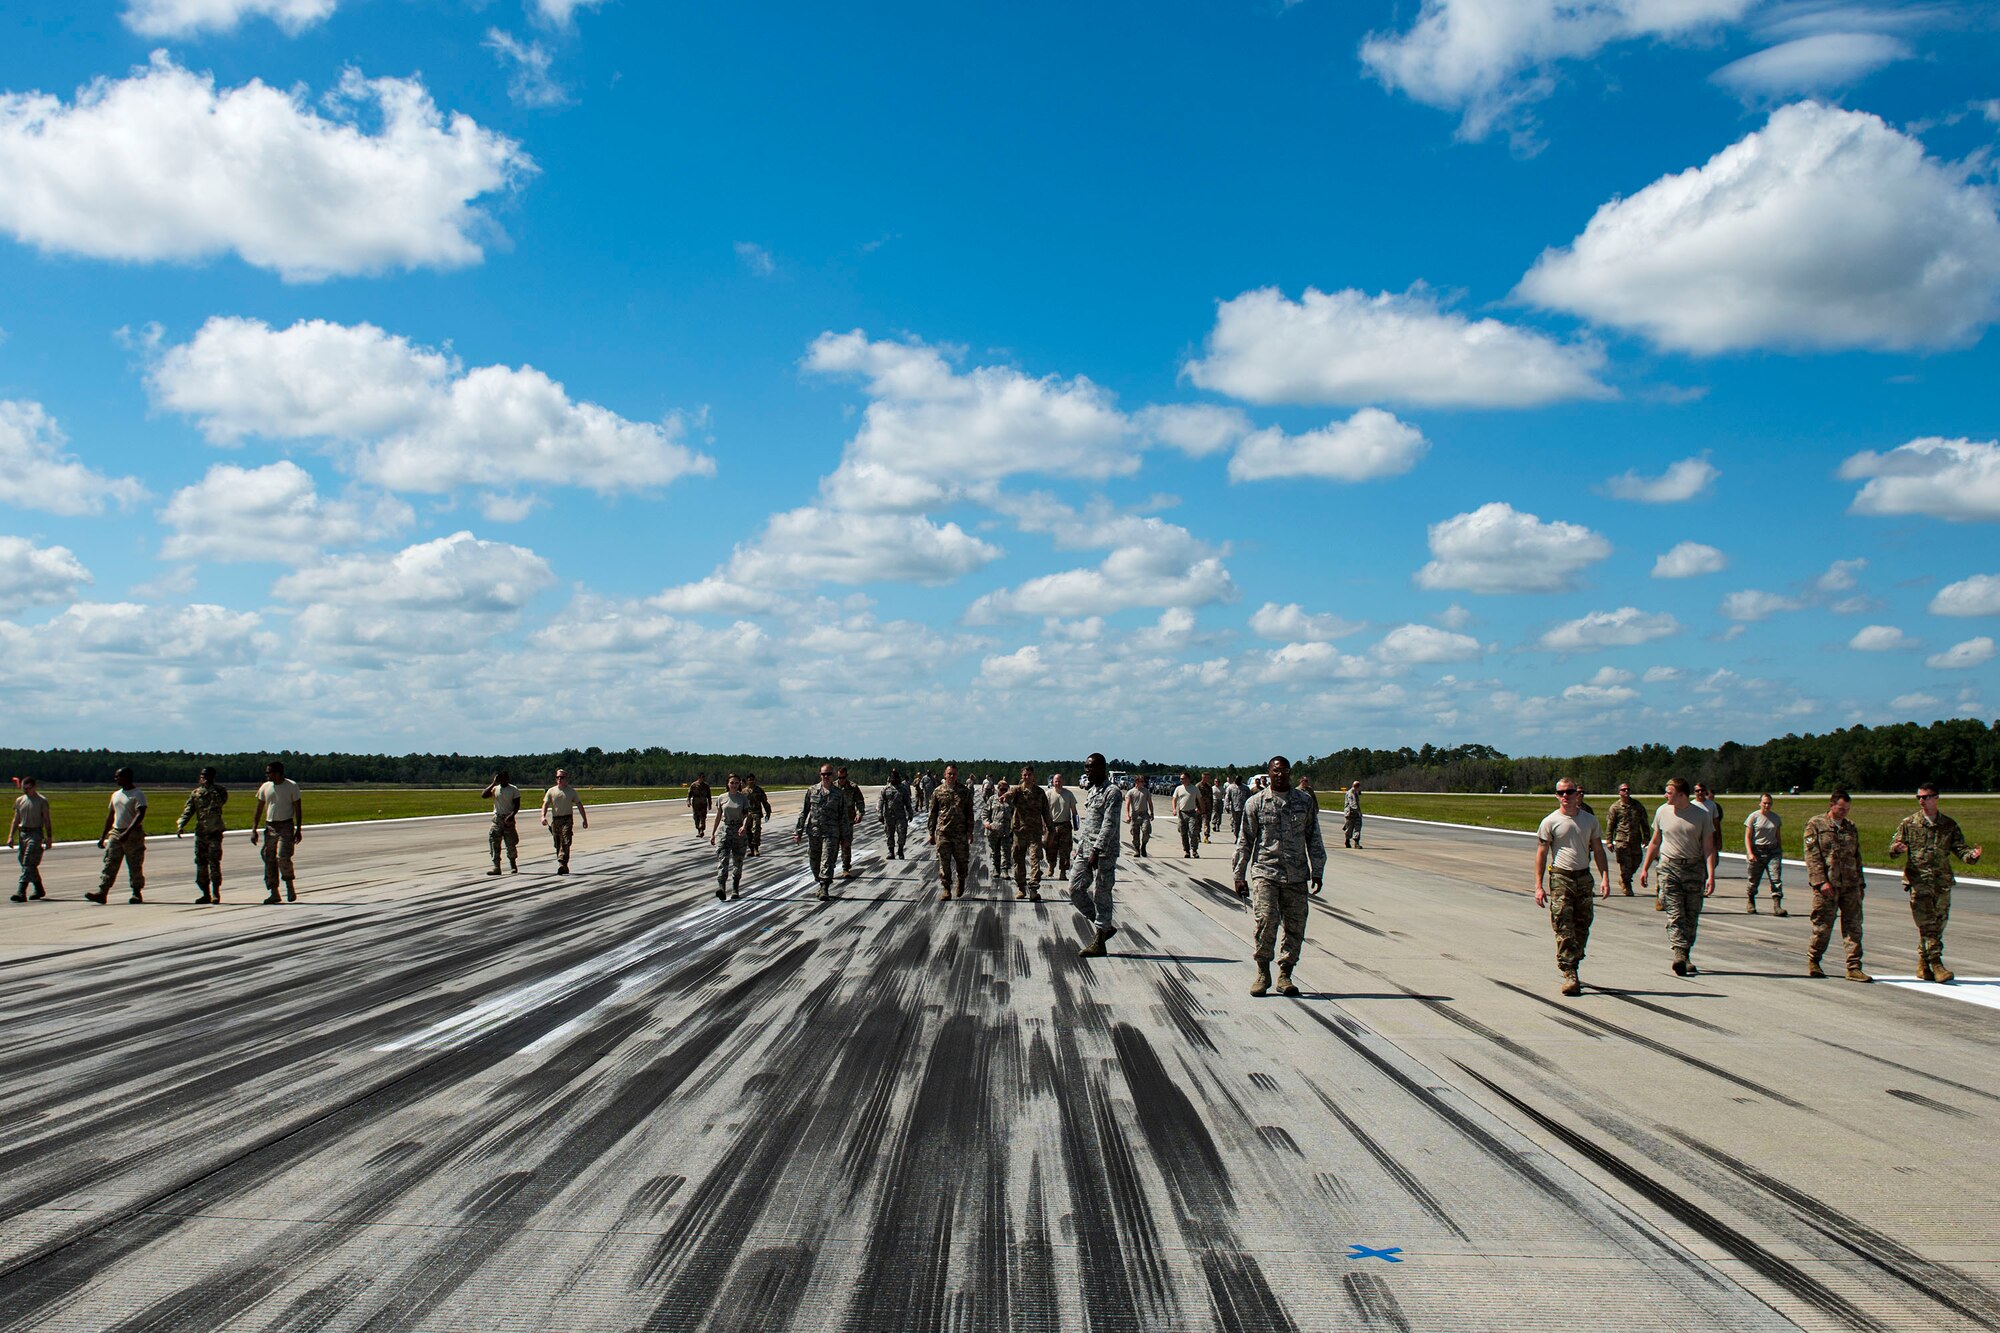 Airmen from the 23d Civil Engineer Squadron (CES) walk to simulated damaged areas during airfield recovery training, May 23, 2019, at Moody Air Force Base, Ga. The training consisted of Airmen responding to a simulated bombed airfield and perform the proper steps and procedures to ensure rapid airfield damage repair. The training prepared the Airmen for potential threats that they could face while downrange. “It is our goal that our Airmen will become more familiar with the tactics, techniques and procedures (TTPs) in the absence of resources,” said Chief Master Sgt. Caleb Vaden, 23d CES superintendent. “Our Airmen are very resourceful, and are able to drive great discussion about additional improvements to the current TTPs, that we will continue to consolidate and share with the Air Force Civil Engineer Center. Through this, we will continue to find ways to amplify our engineer’s readiness by whatever means we have.” (U.S. Air Force photo by Senior Airman Erick Requadt)